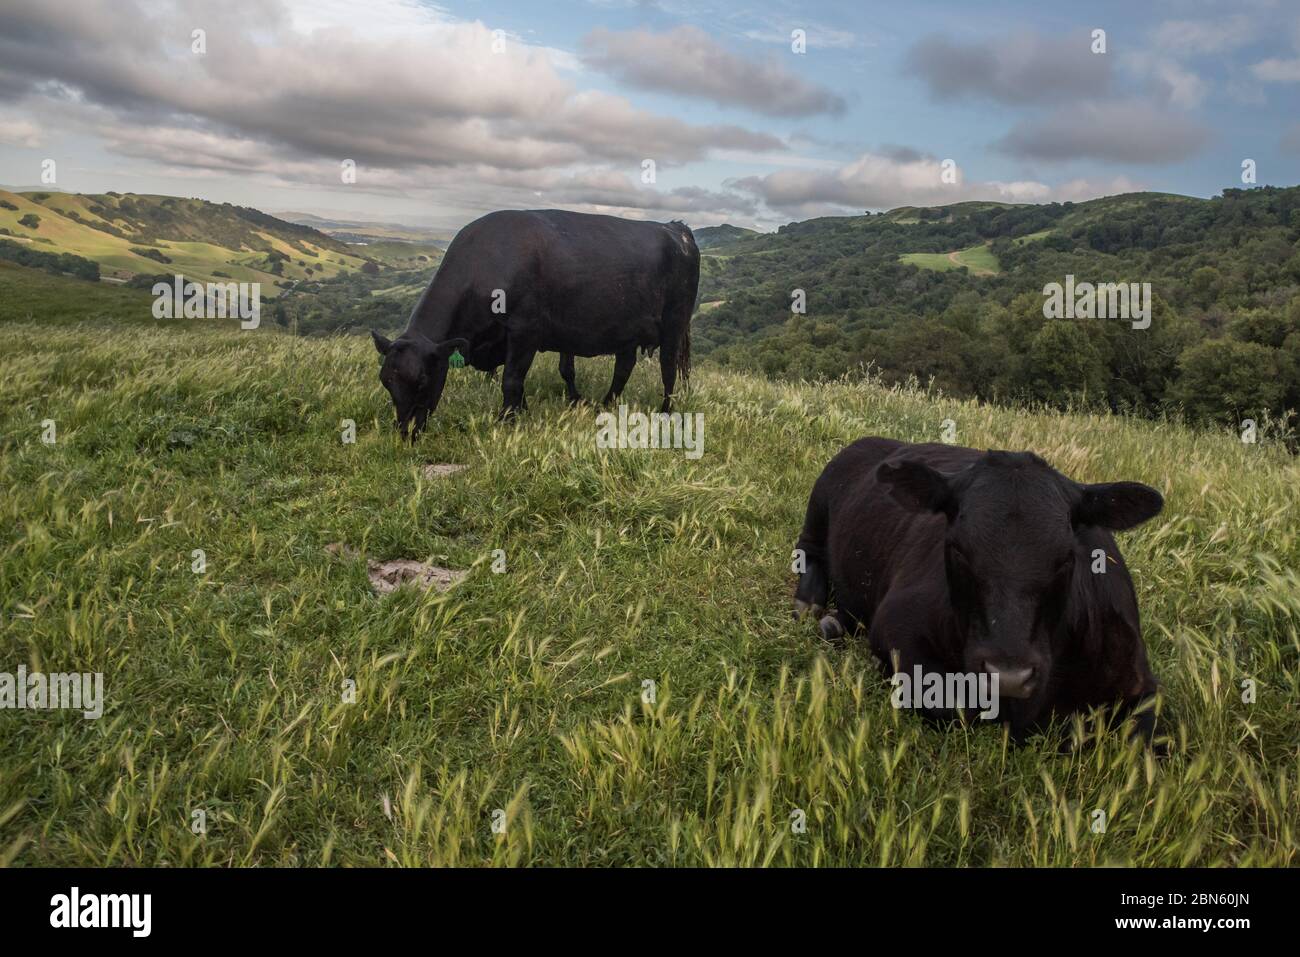 Open range cows grazing in their open landscape in the Bay area of California. Stock Photo